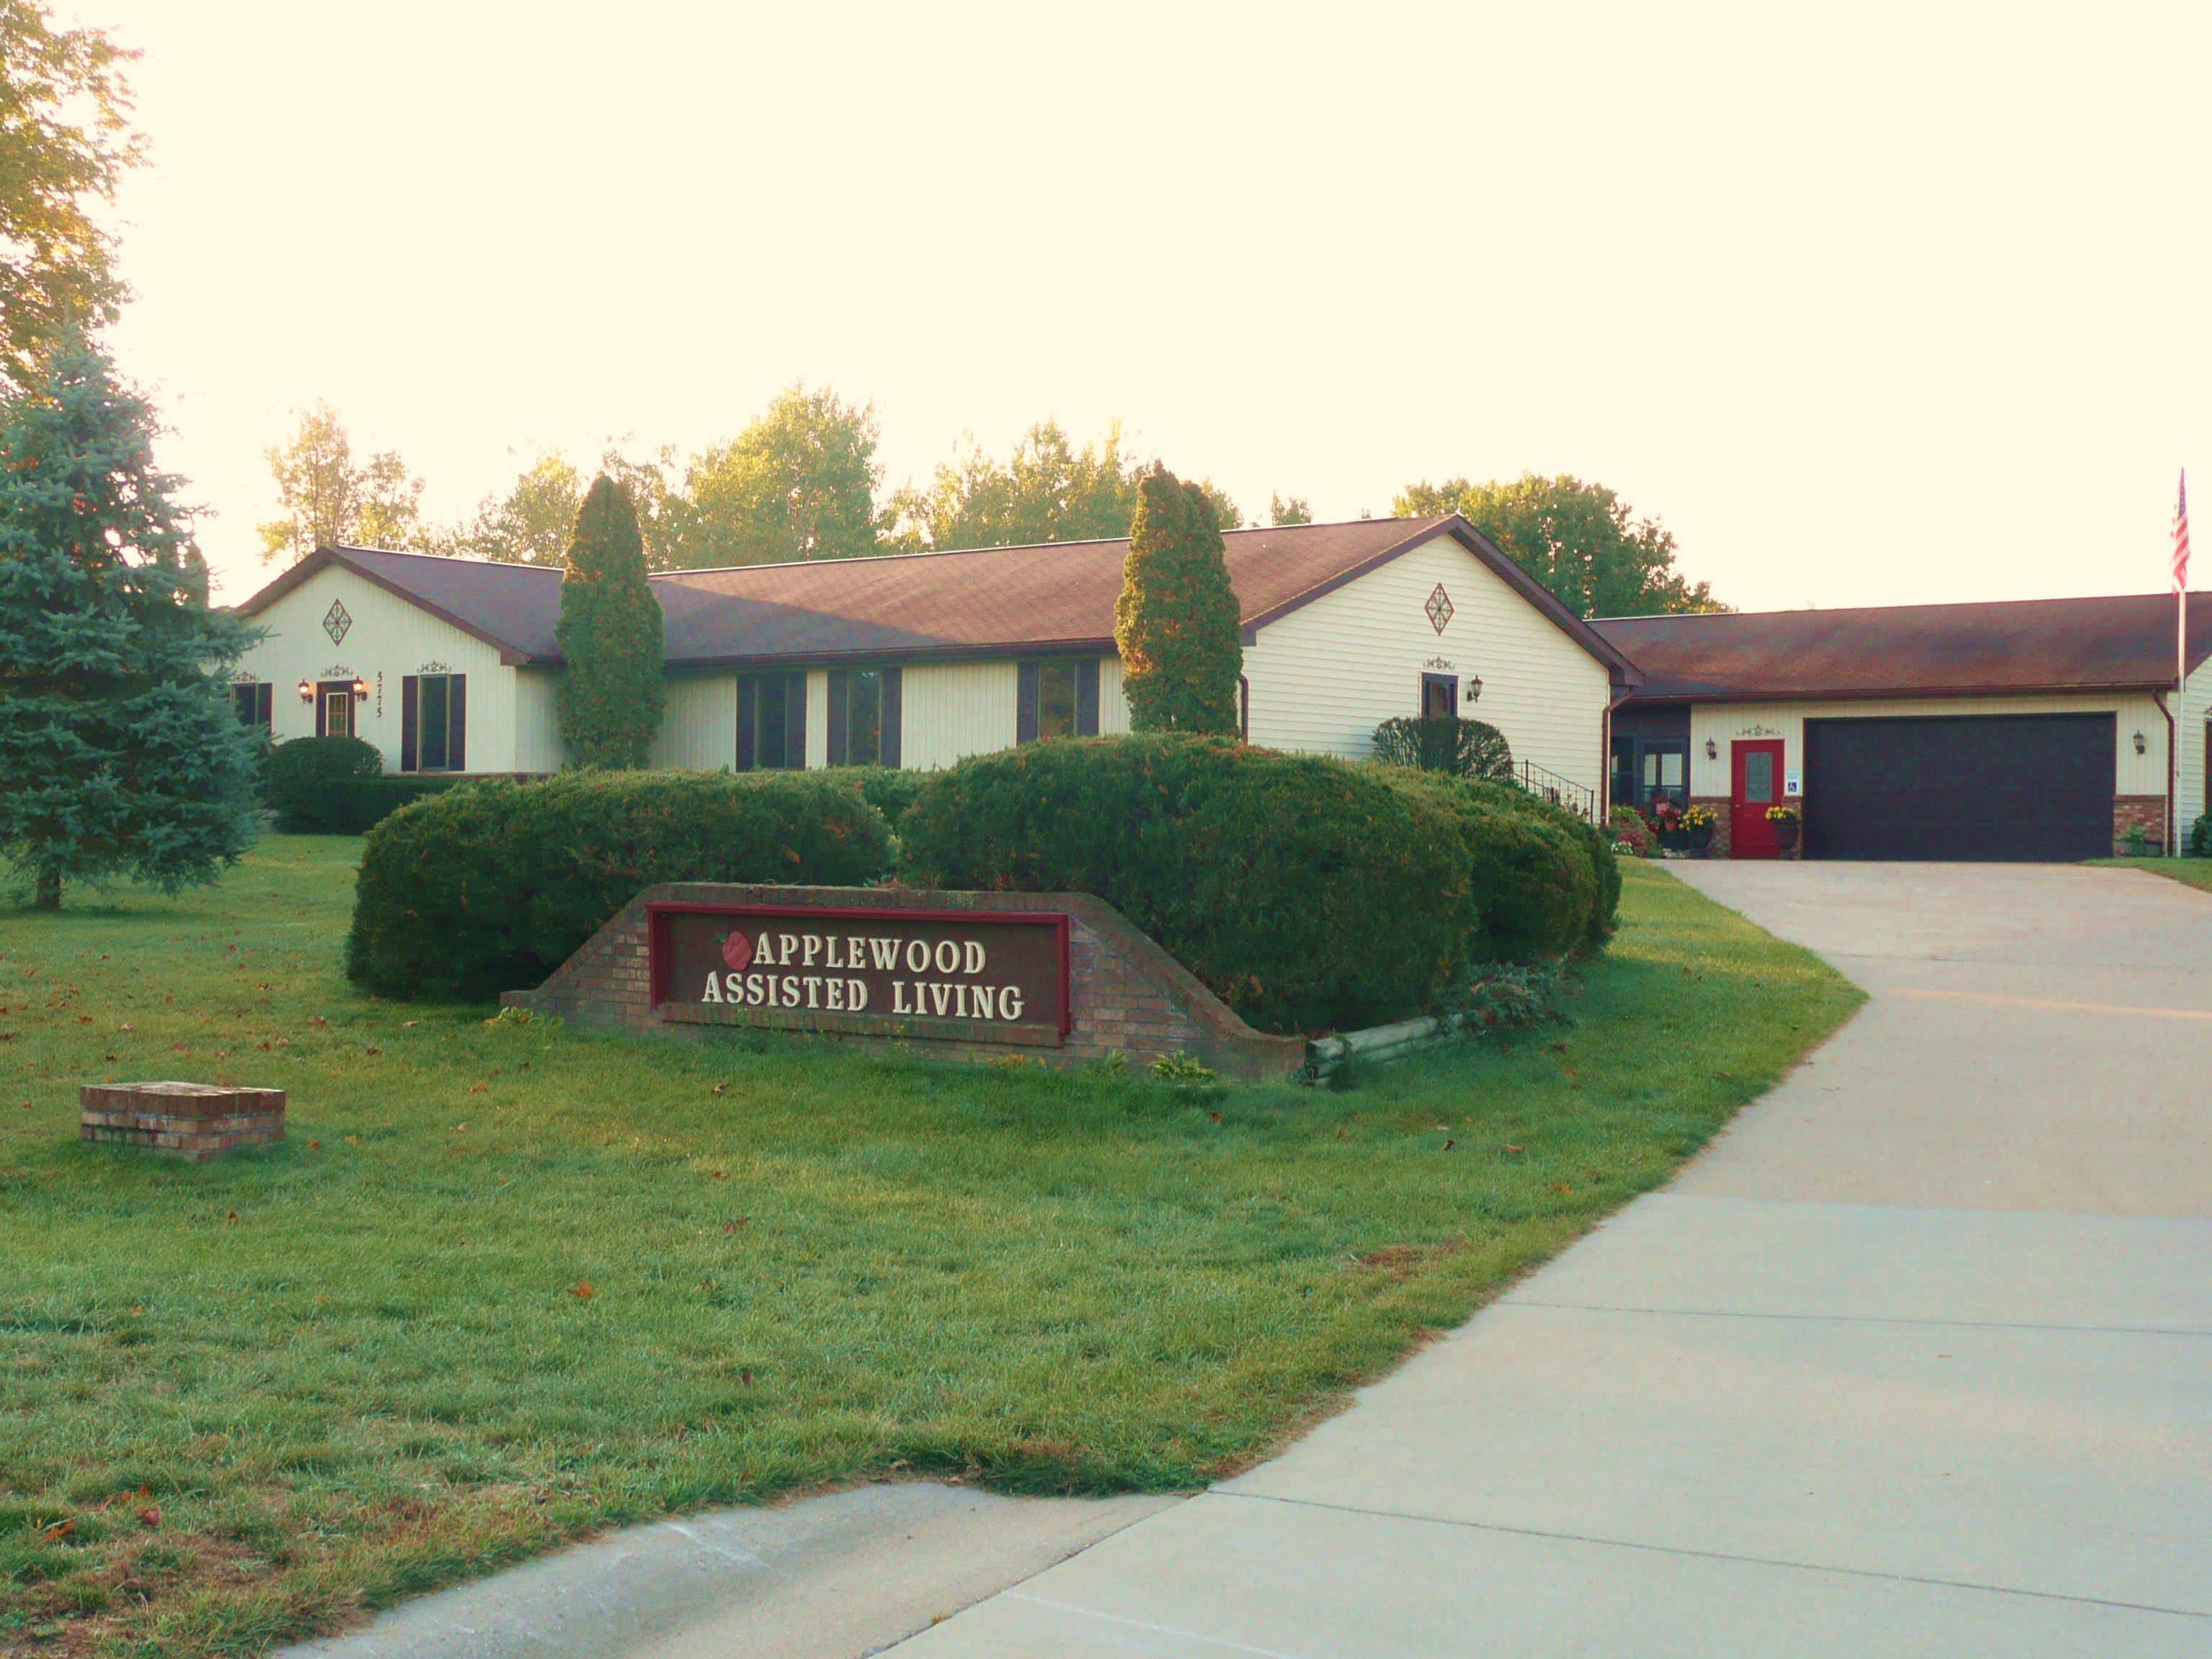 Applewood Assisted Living | Mount Pleasant, MI 48858 | 2 reviews